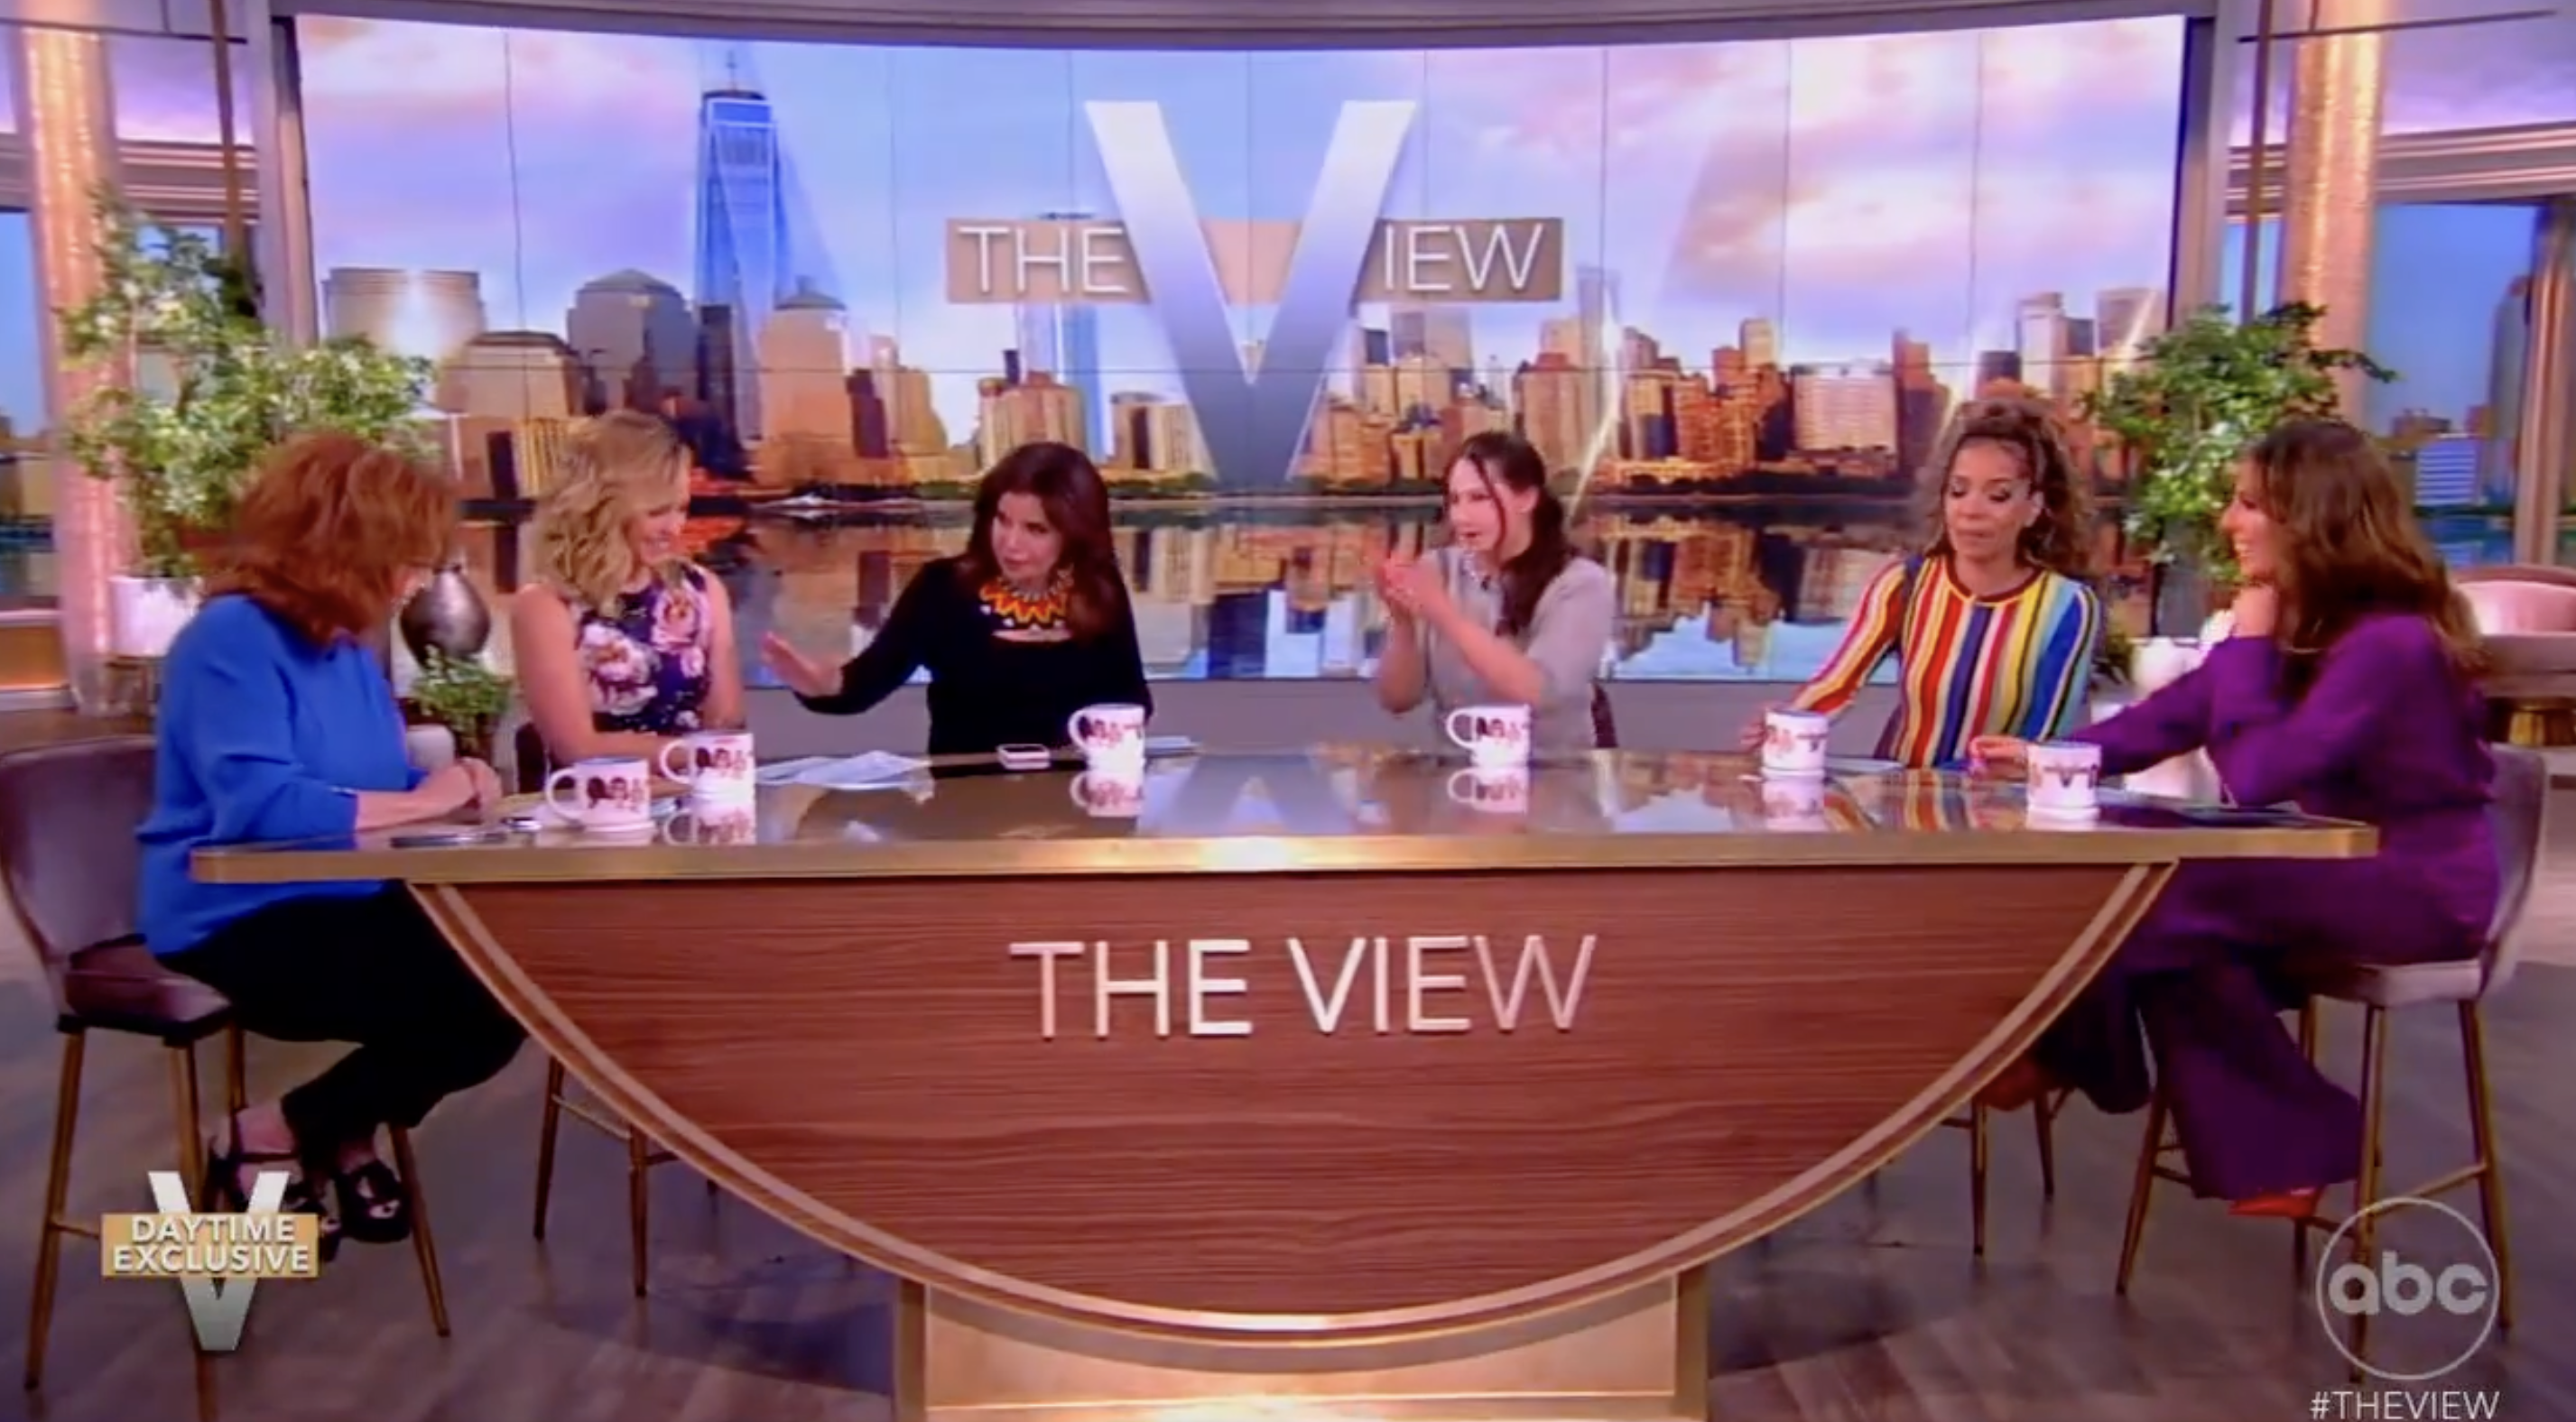 The cohosts of The View with Gypsy Rose at the table